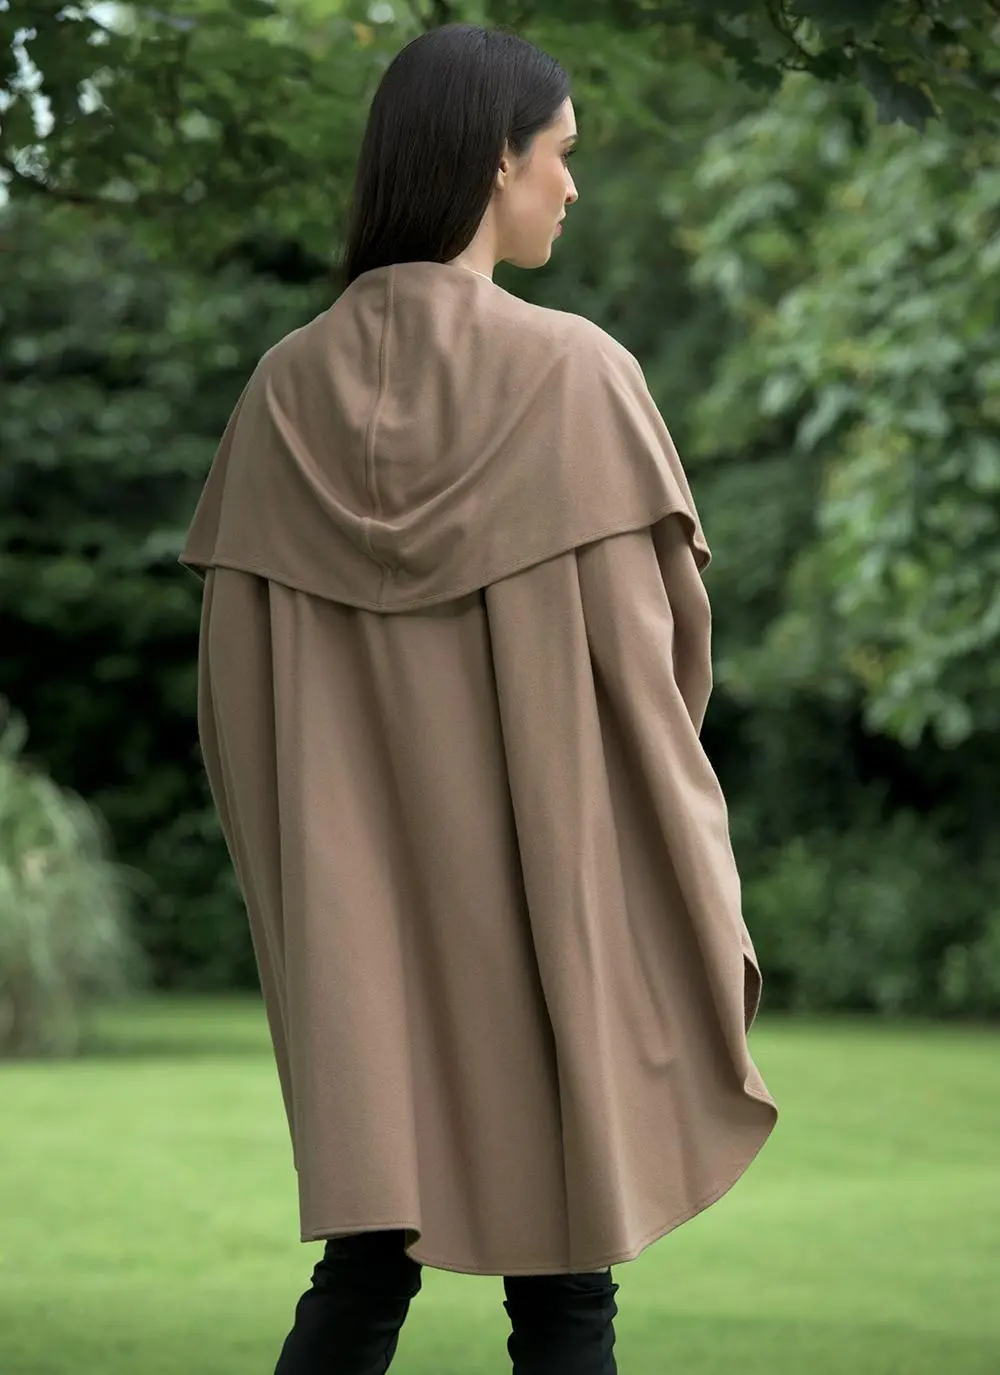 Back angle shot of brunette woman standing outside wearing camel cape.